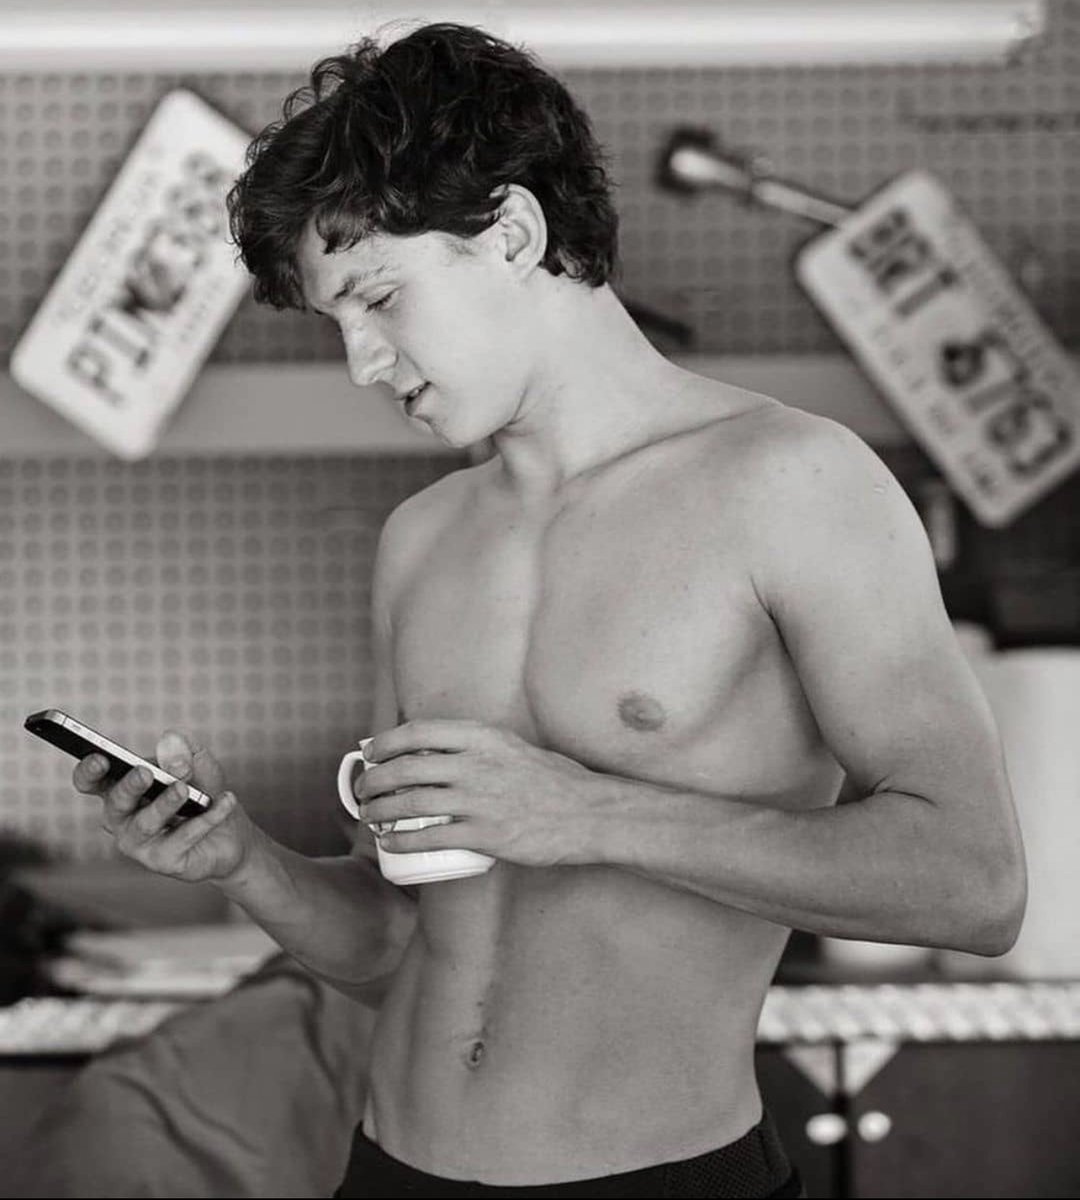 Tom Holland shirtless and sexy #TomHolland #Male #hollywood #actor #hunk.